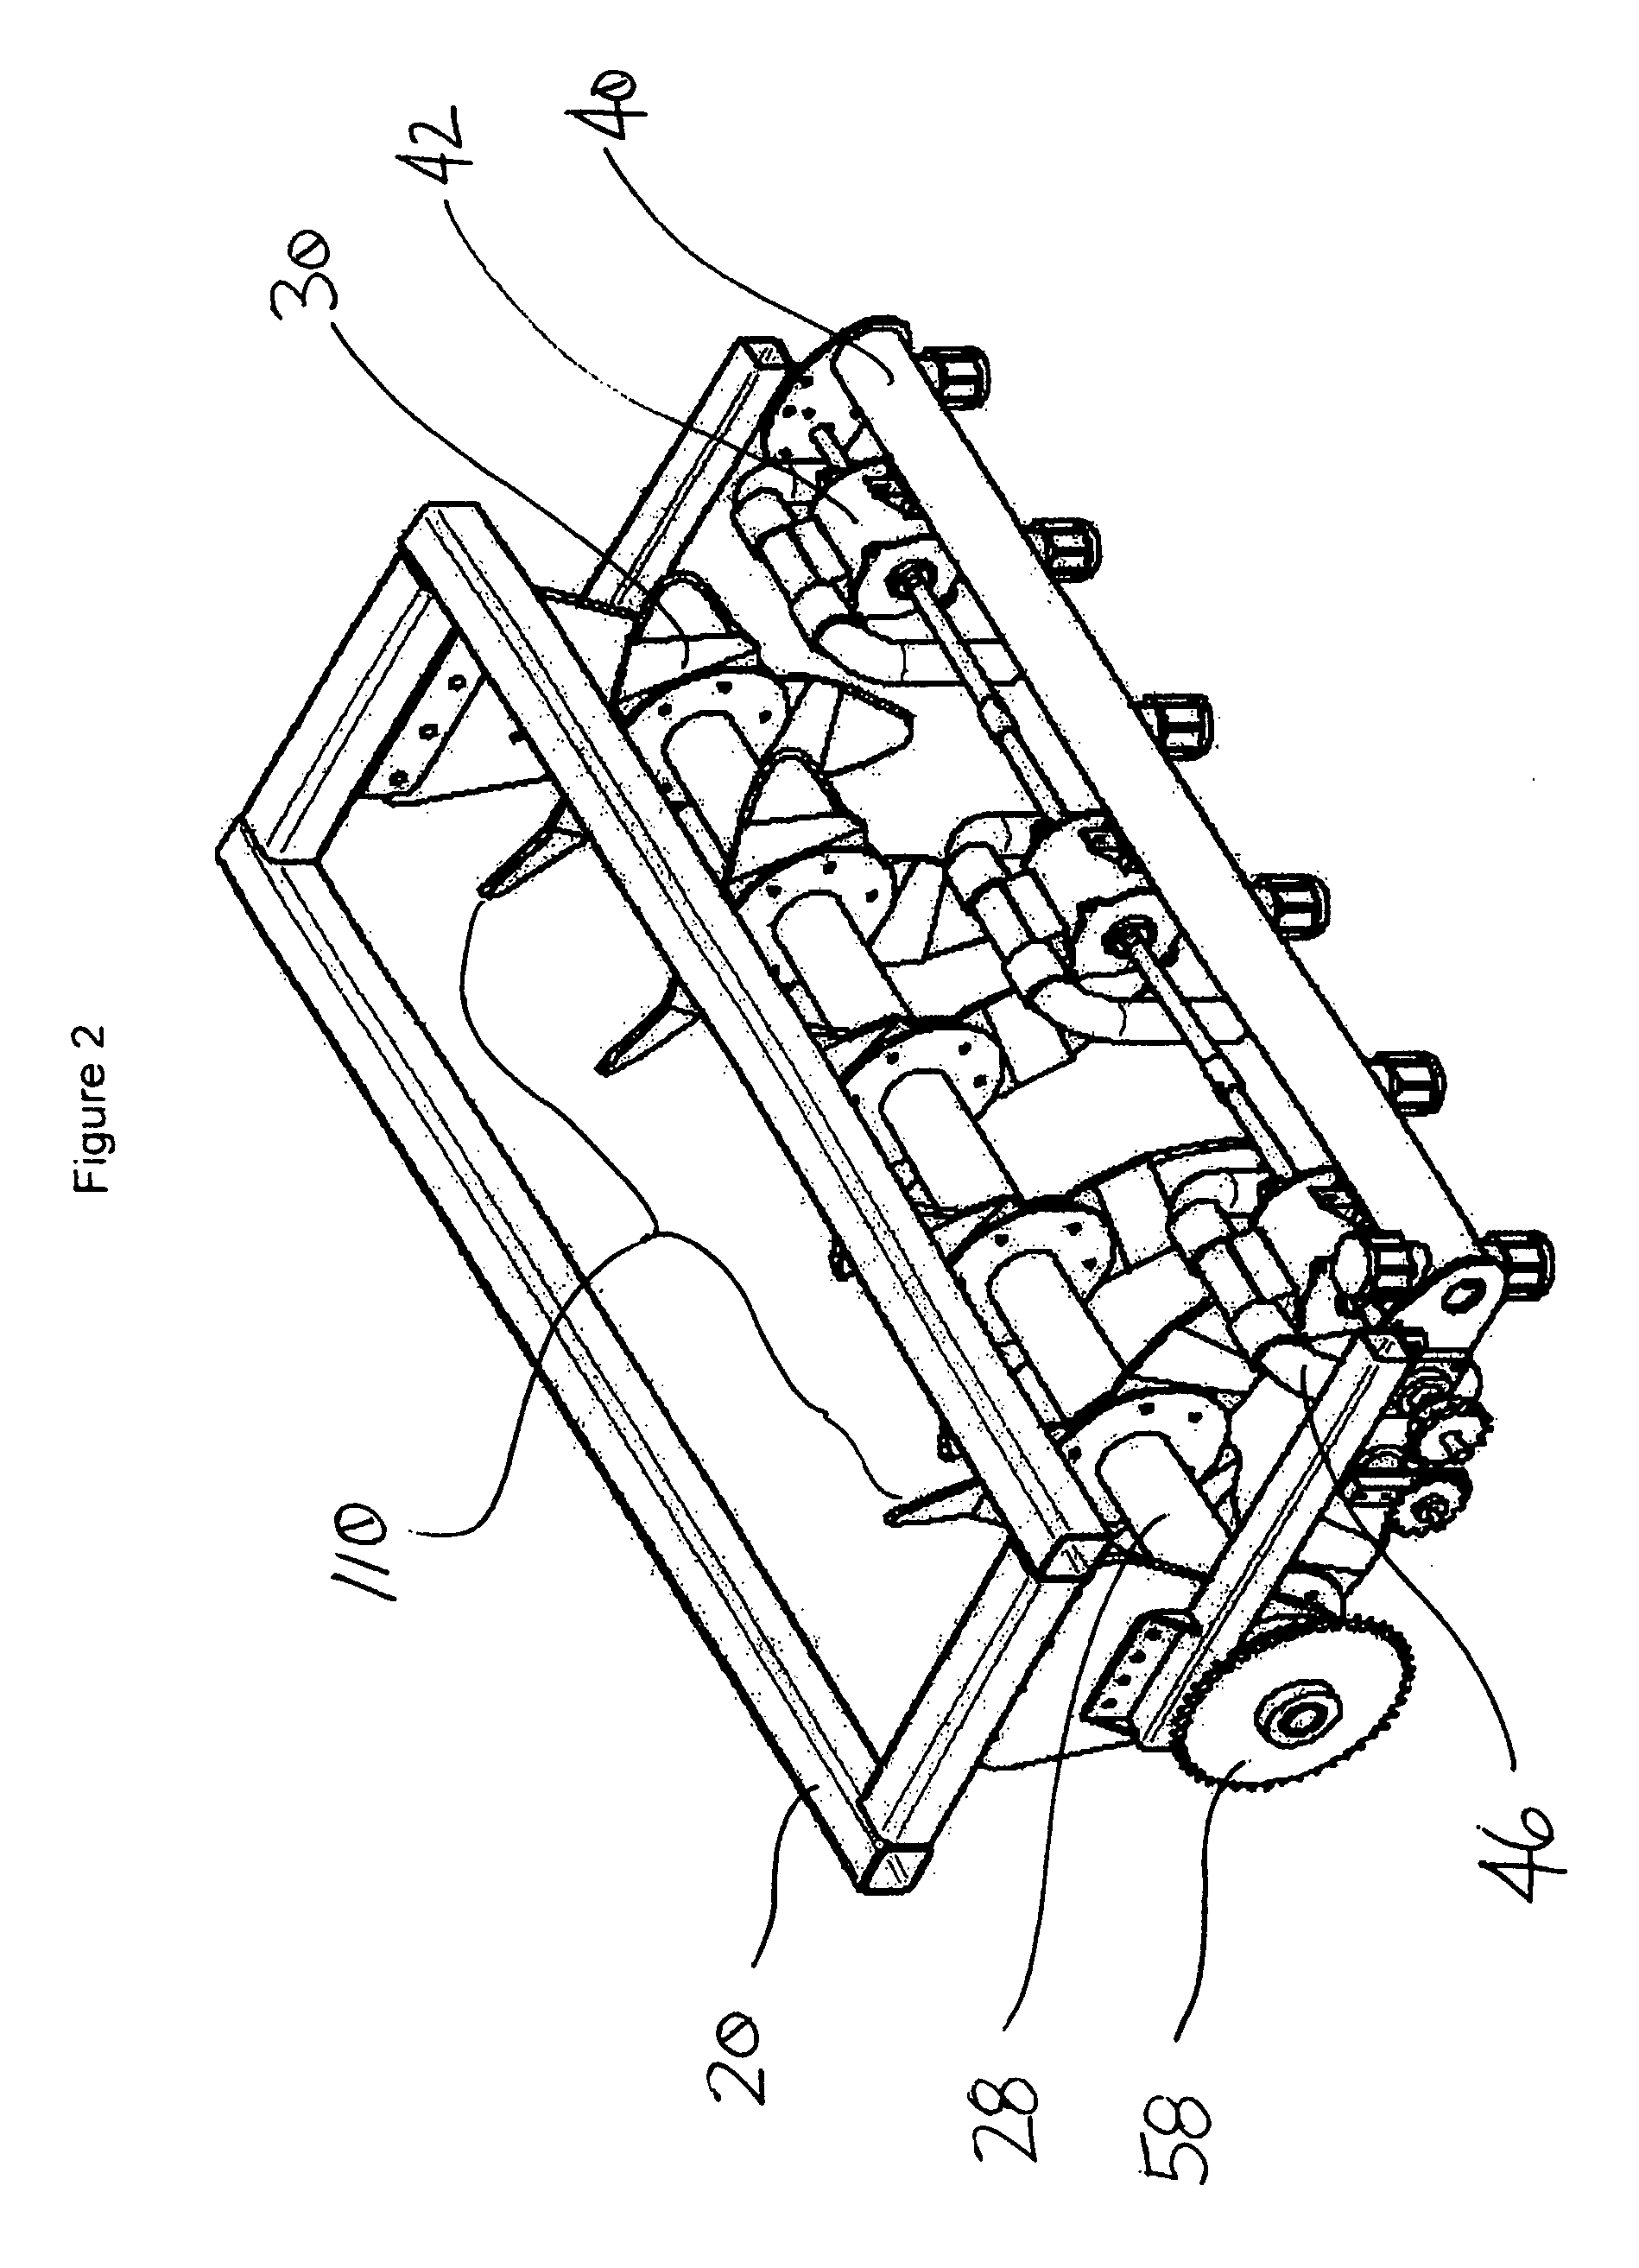 Liquid fertilizer injection method, system, and apparatus